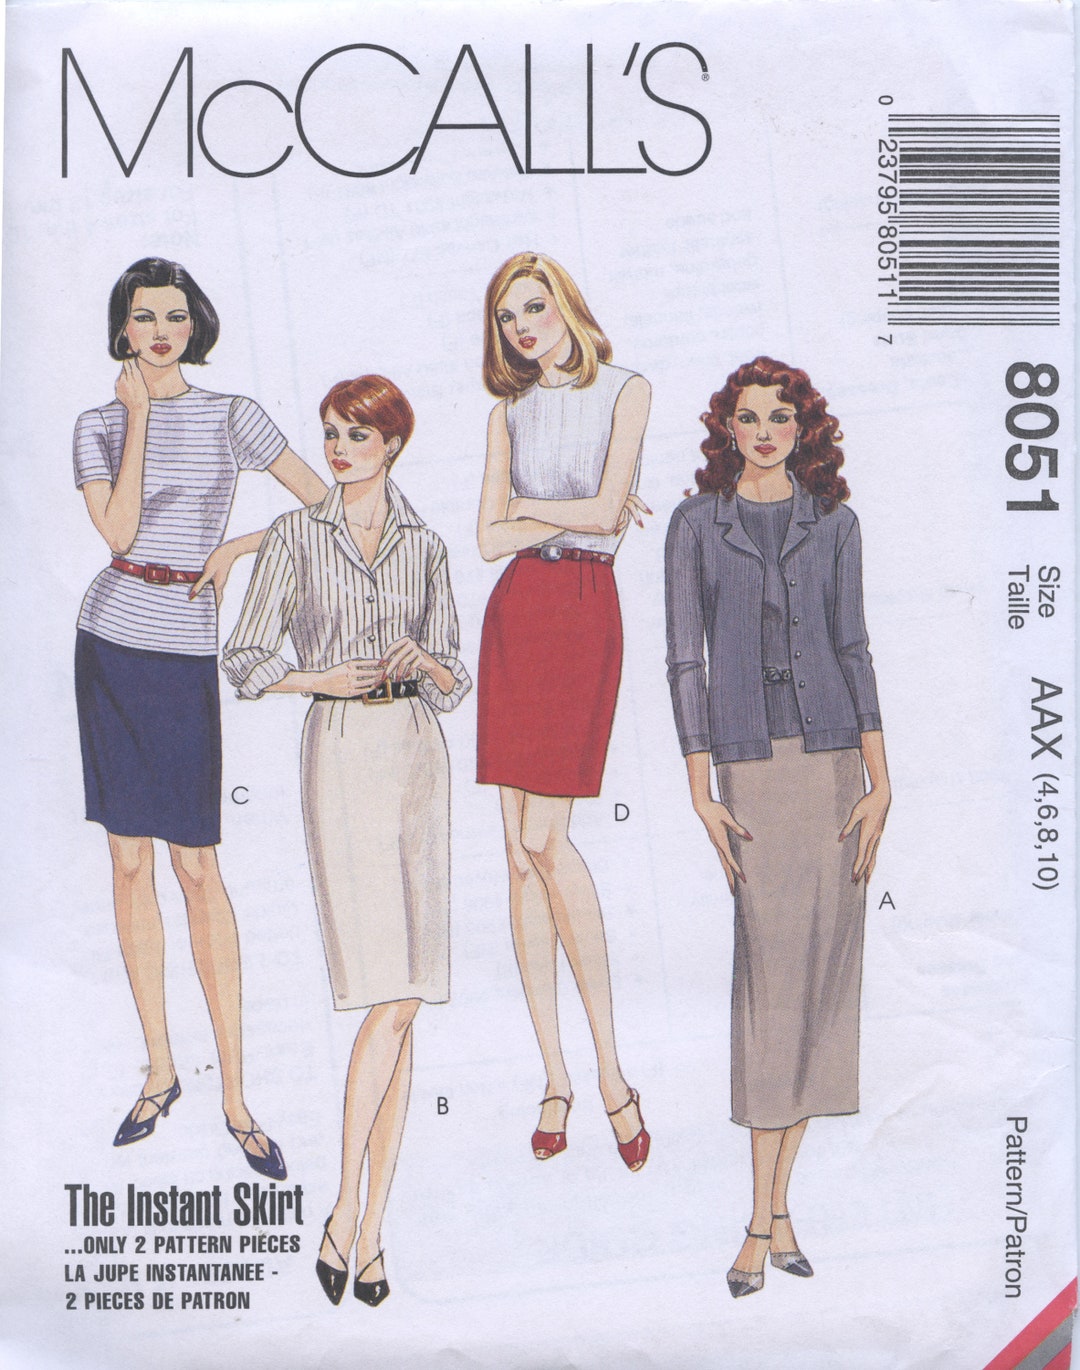 The Instant Skirt Just 2 Pattern Pieces Mccall's 8051 - Etsy